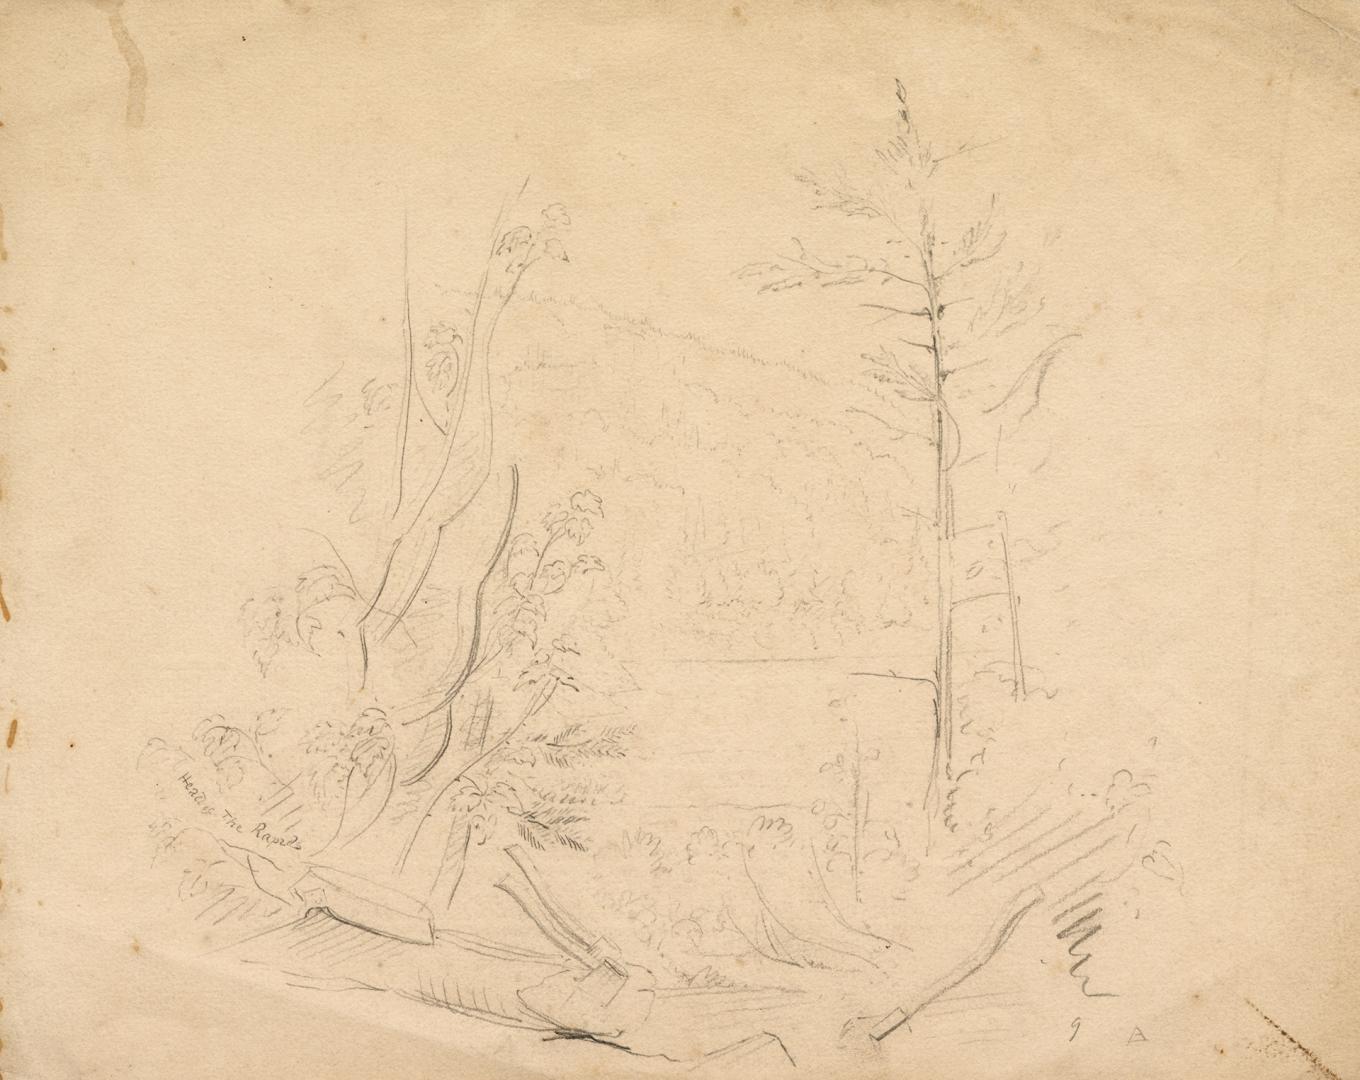 A very faded drawing of a lake, with a mountain in the background and trees in the foreground.